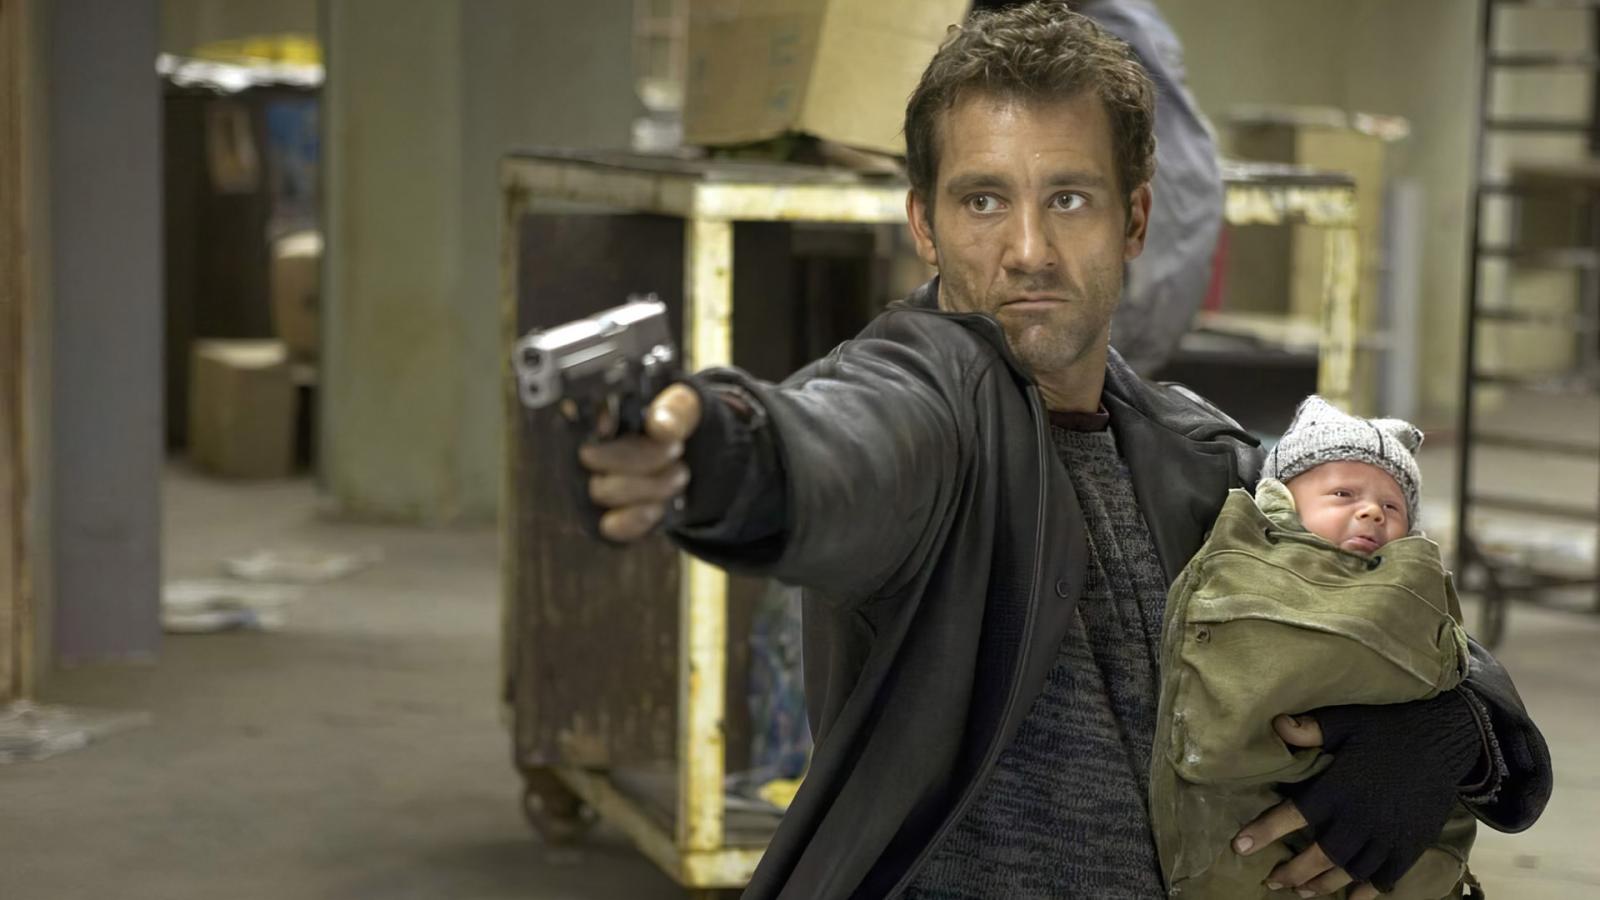 14 Most Underrated Action Movies of the 2000s, Ranked - image 1